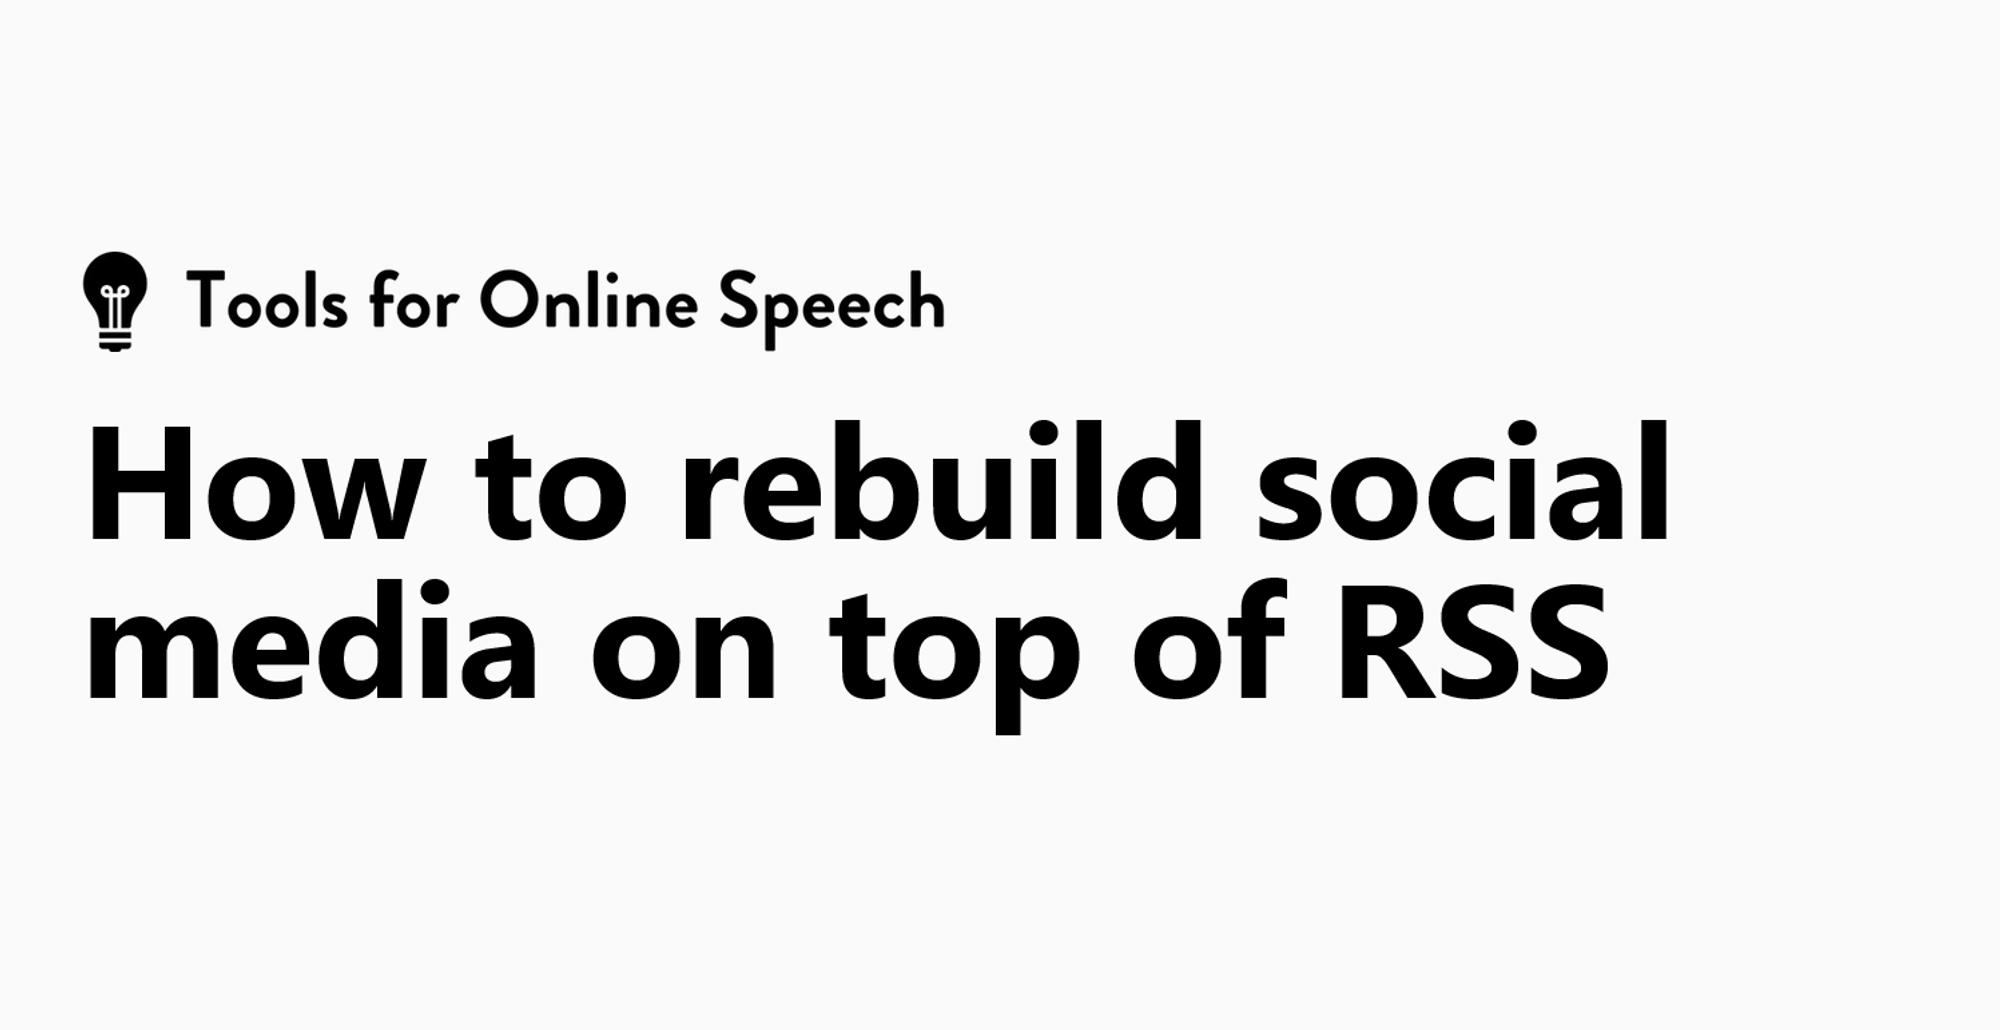 How to rebuild social media on top of RSS